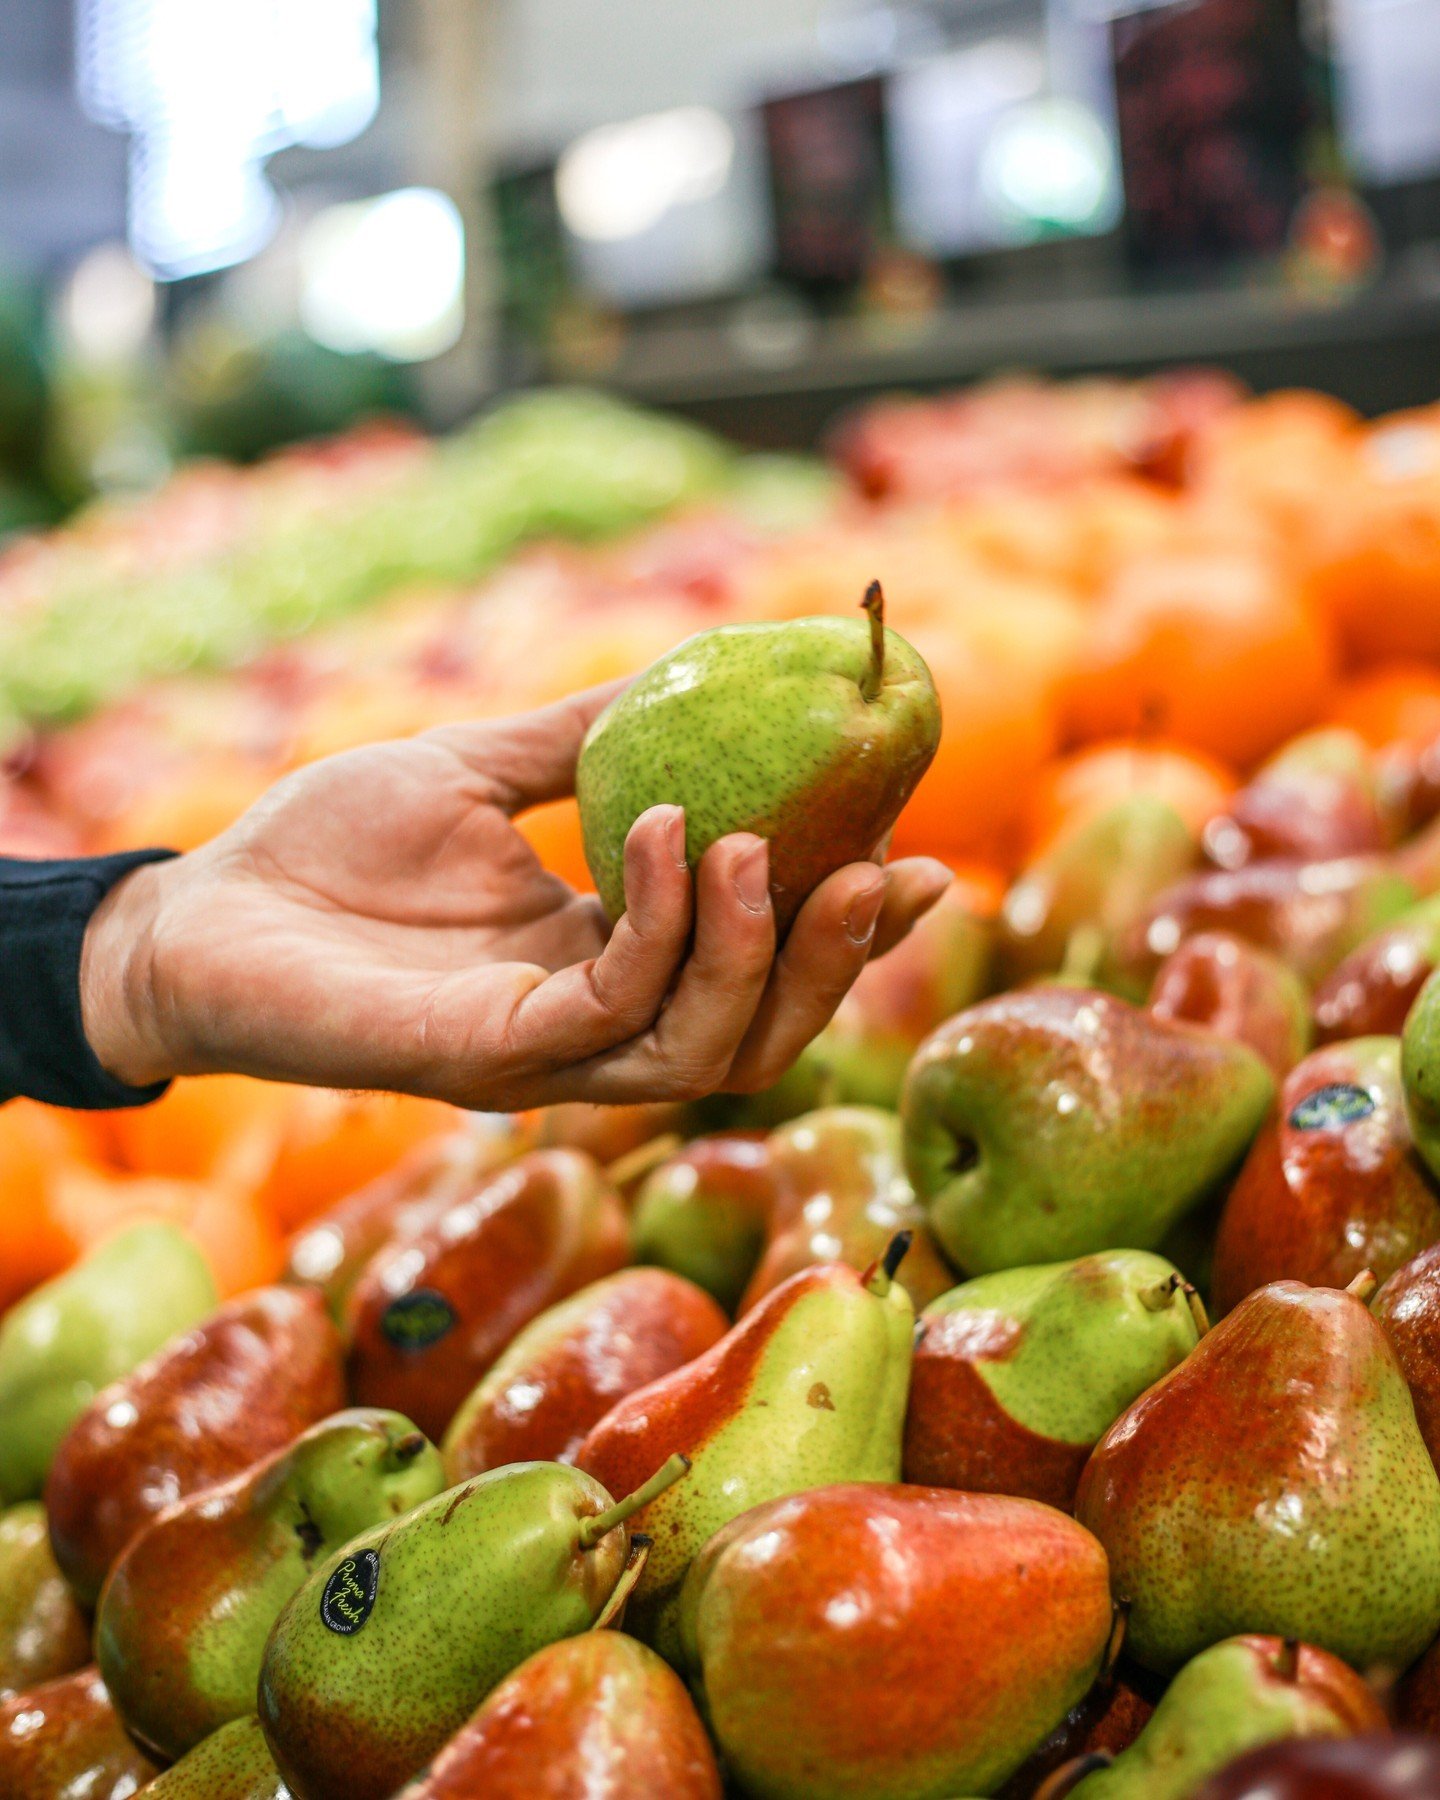 The Markets are bursting with fresh seasonal fruits and vegetables, and now is the perfect time to fill your shopping cart with all the delicious flavours of Autumn!🍊🛒

Here's our top picks for May; 

✔️ APPLES &amp; PEARS: All apples are new in-se